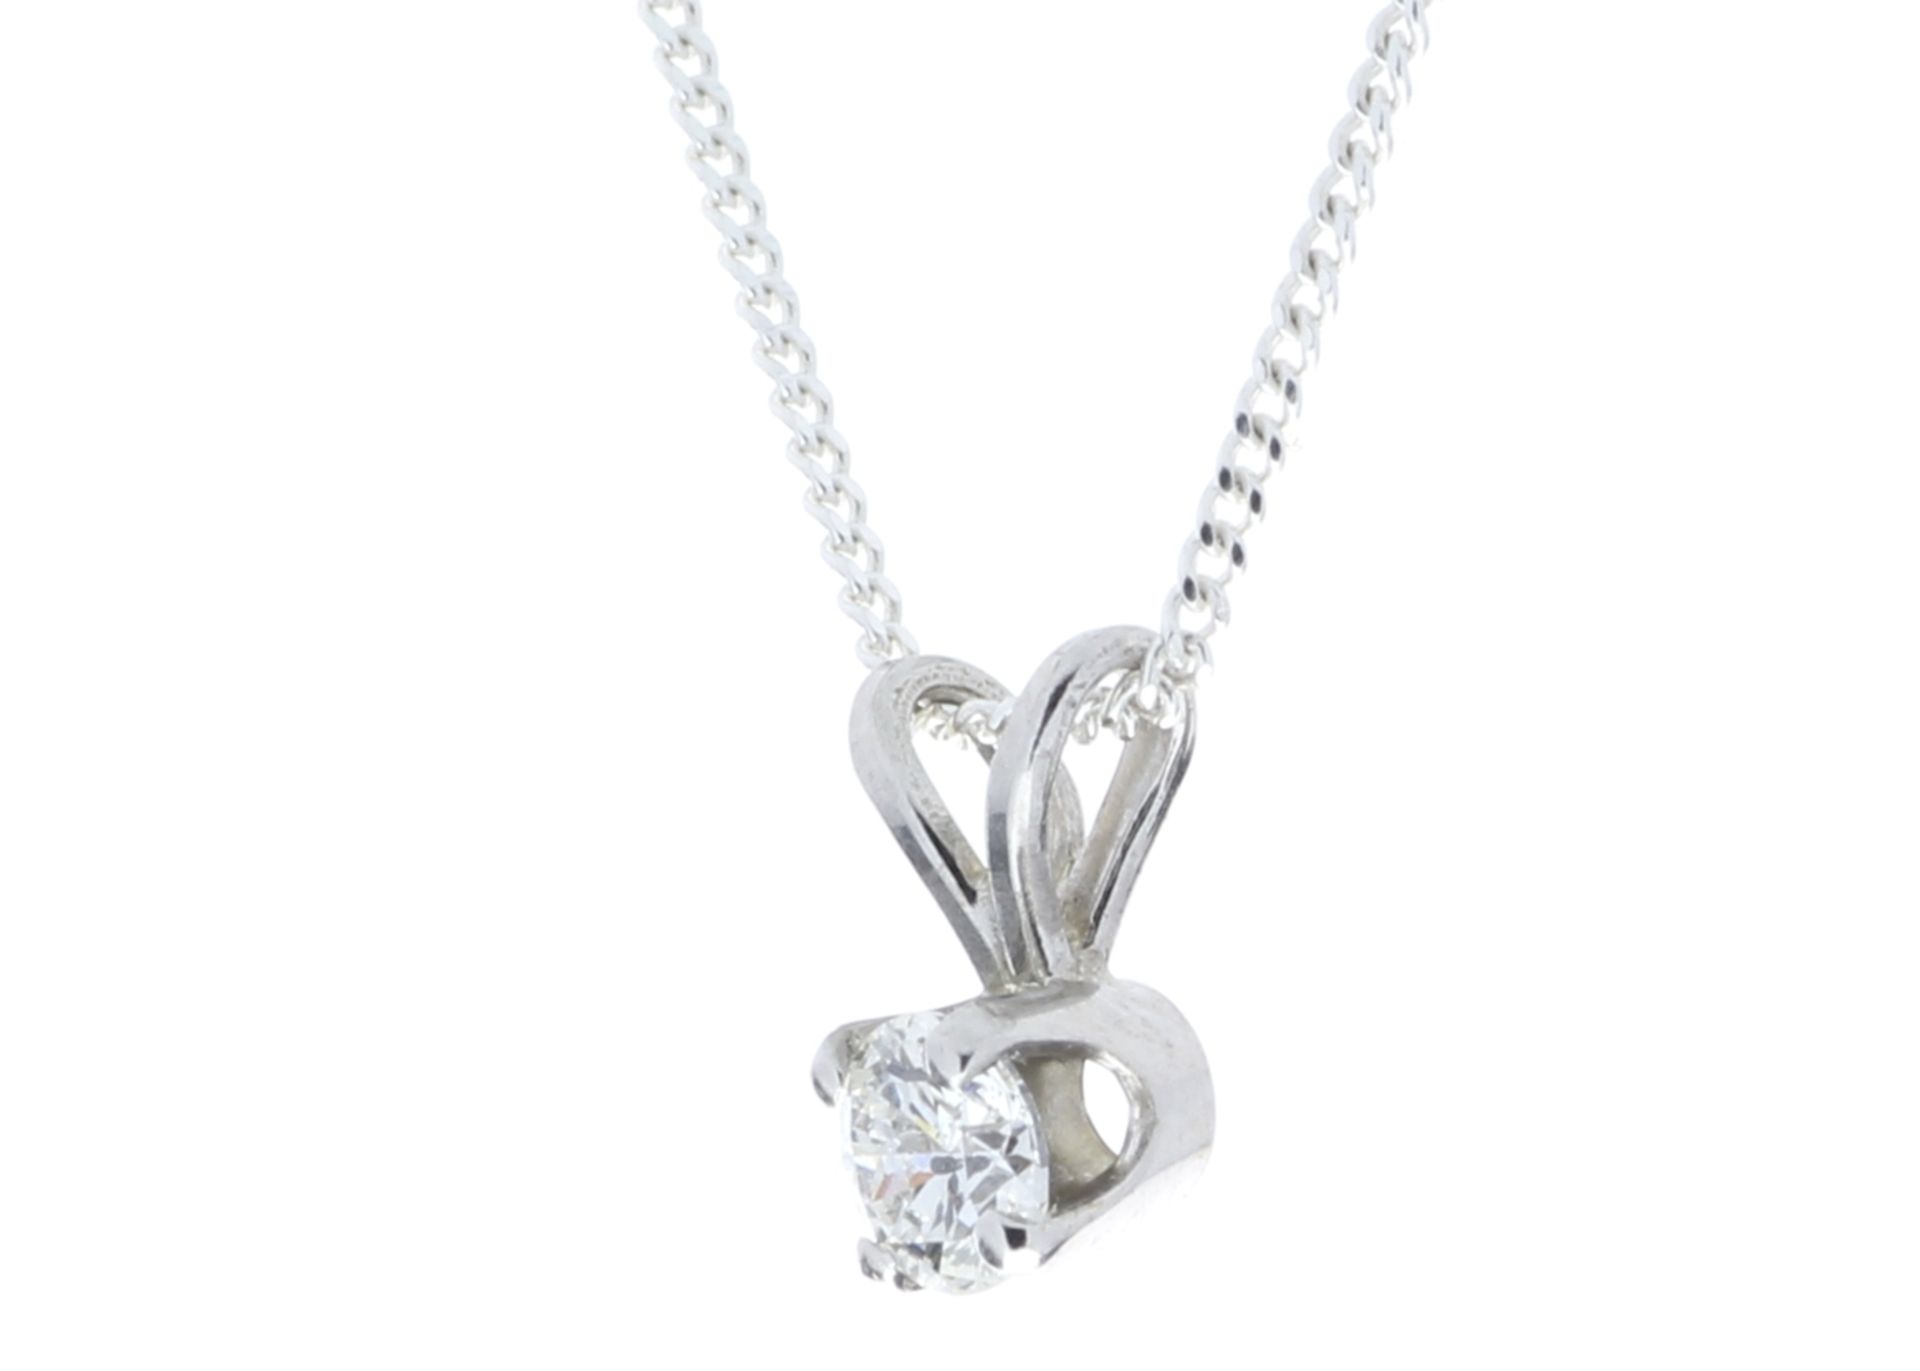 9ct White Gold Single Stone Claw Set Diamond Pendant 0.15 Carats - Valued By GIE £2,030.00 - A - Image 3 of 6